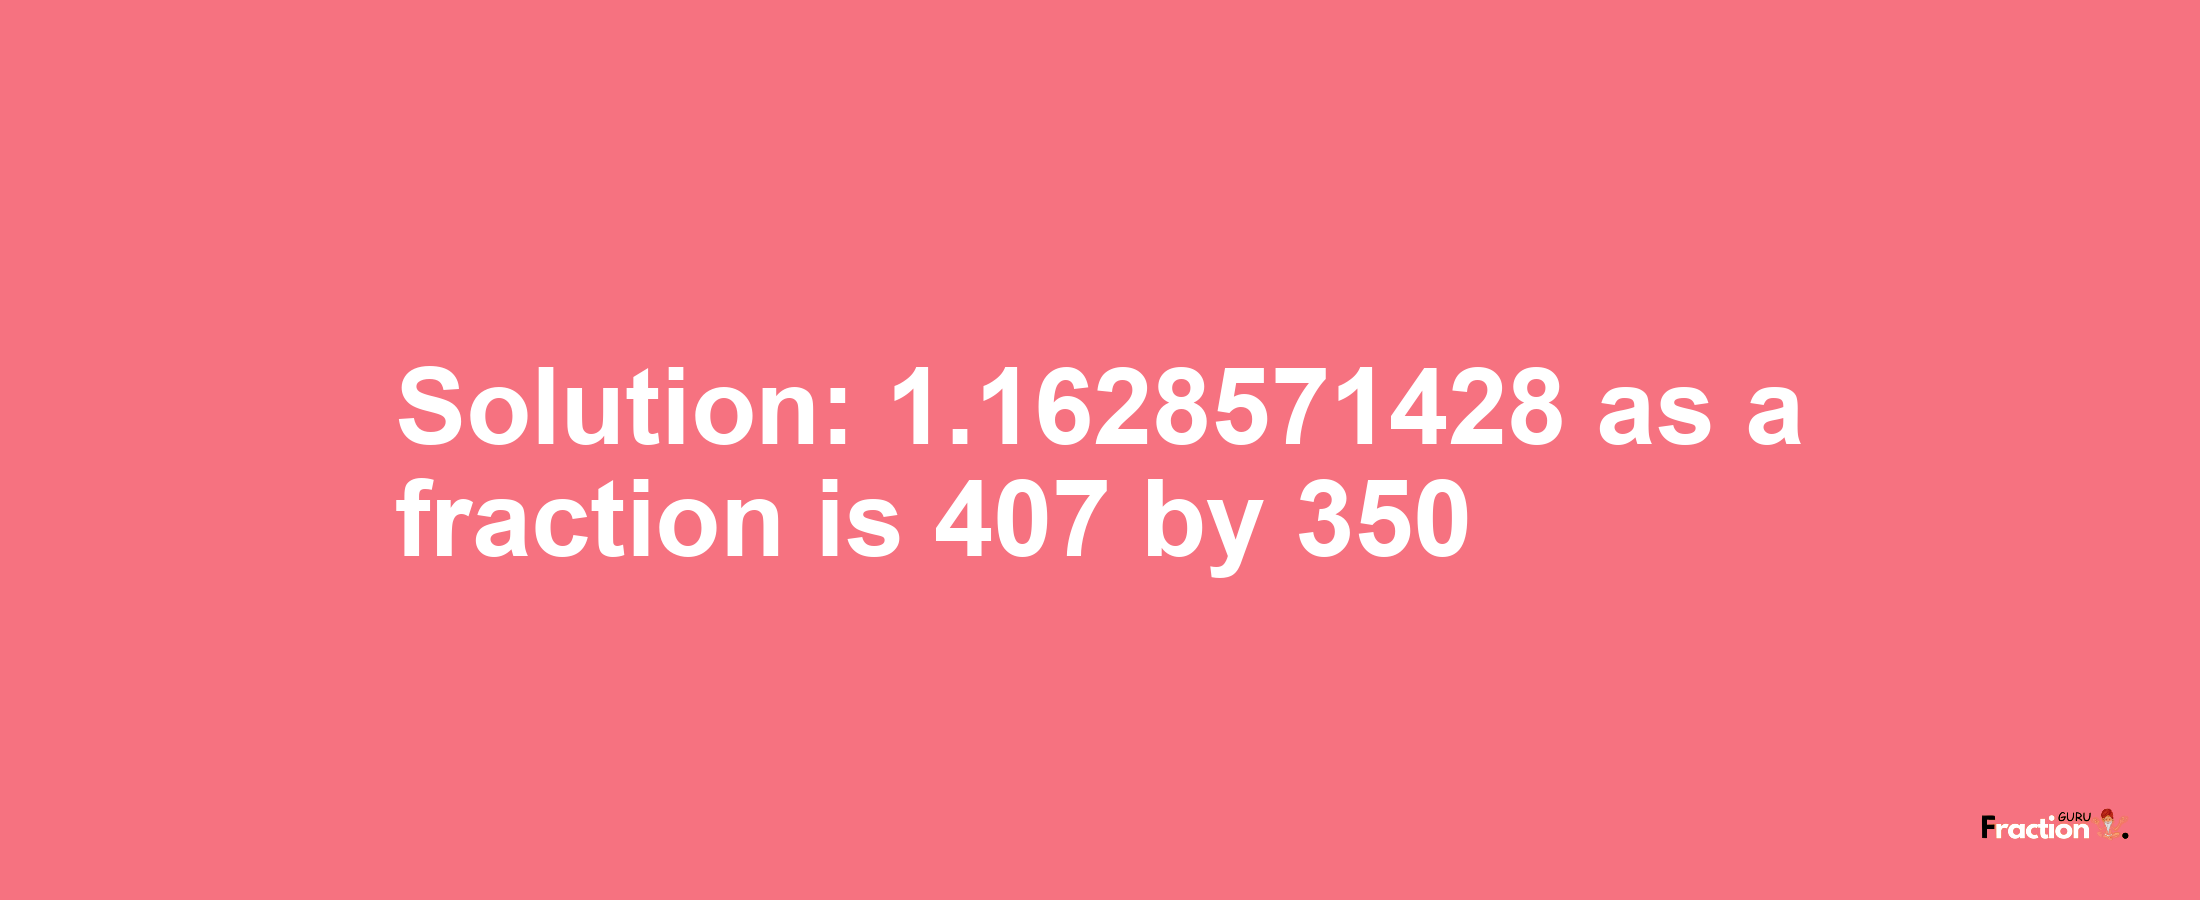 Solution:1.1628571428 as a fraction is 407/350